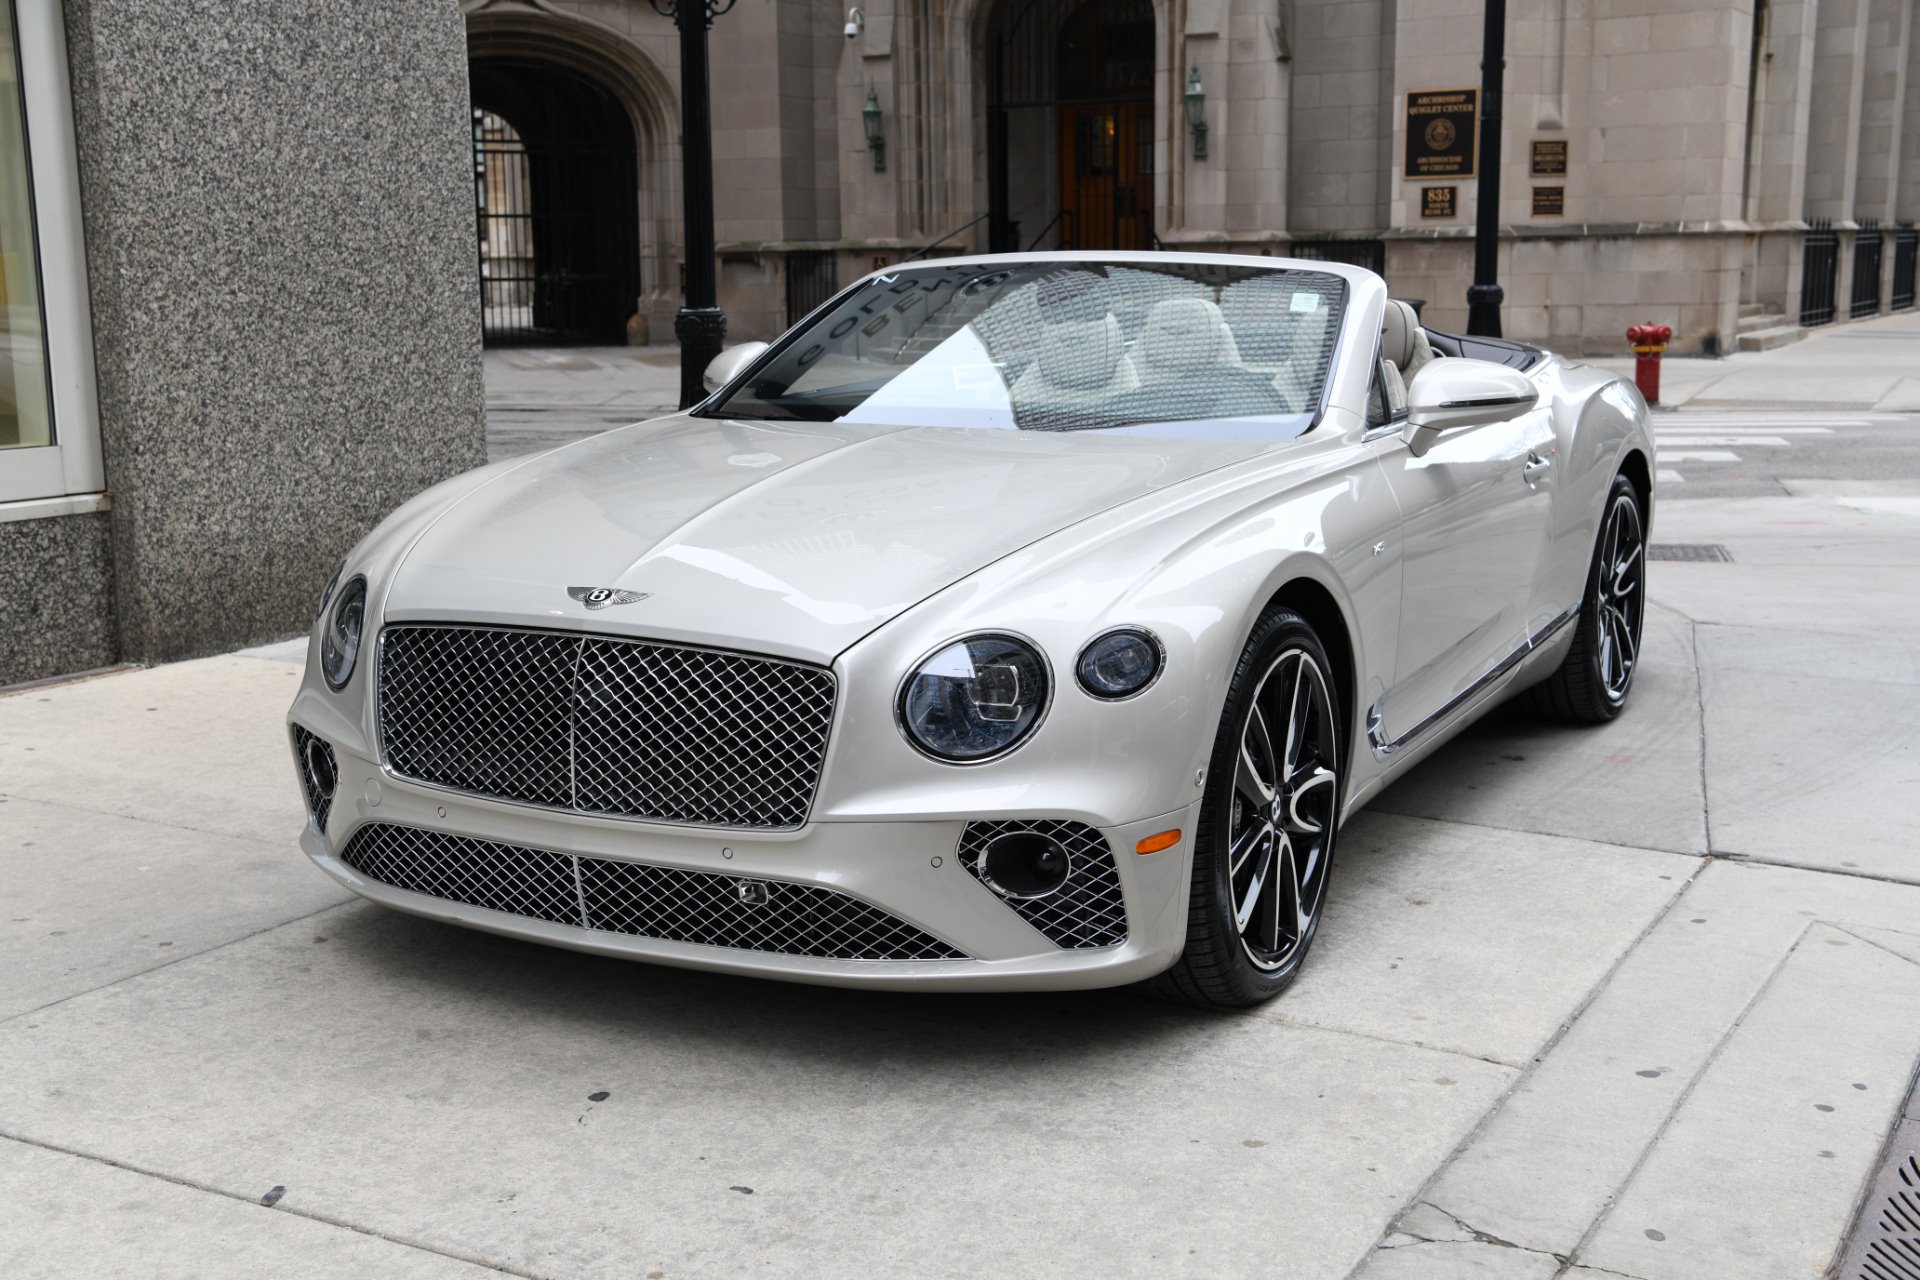 2021 Bentley Continental GT V8 Convertible Stock # B1383-S for sale near  Chicago, IL | IL Bentley Dealer